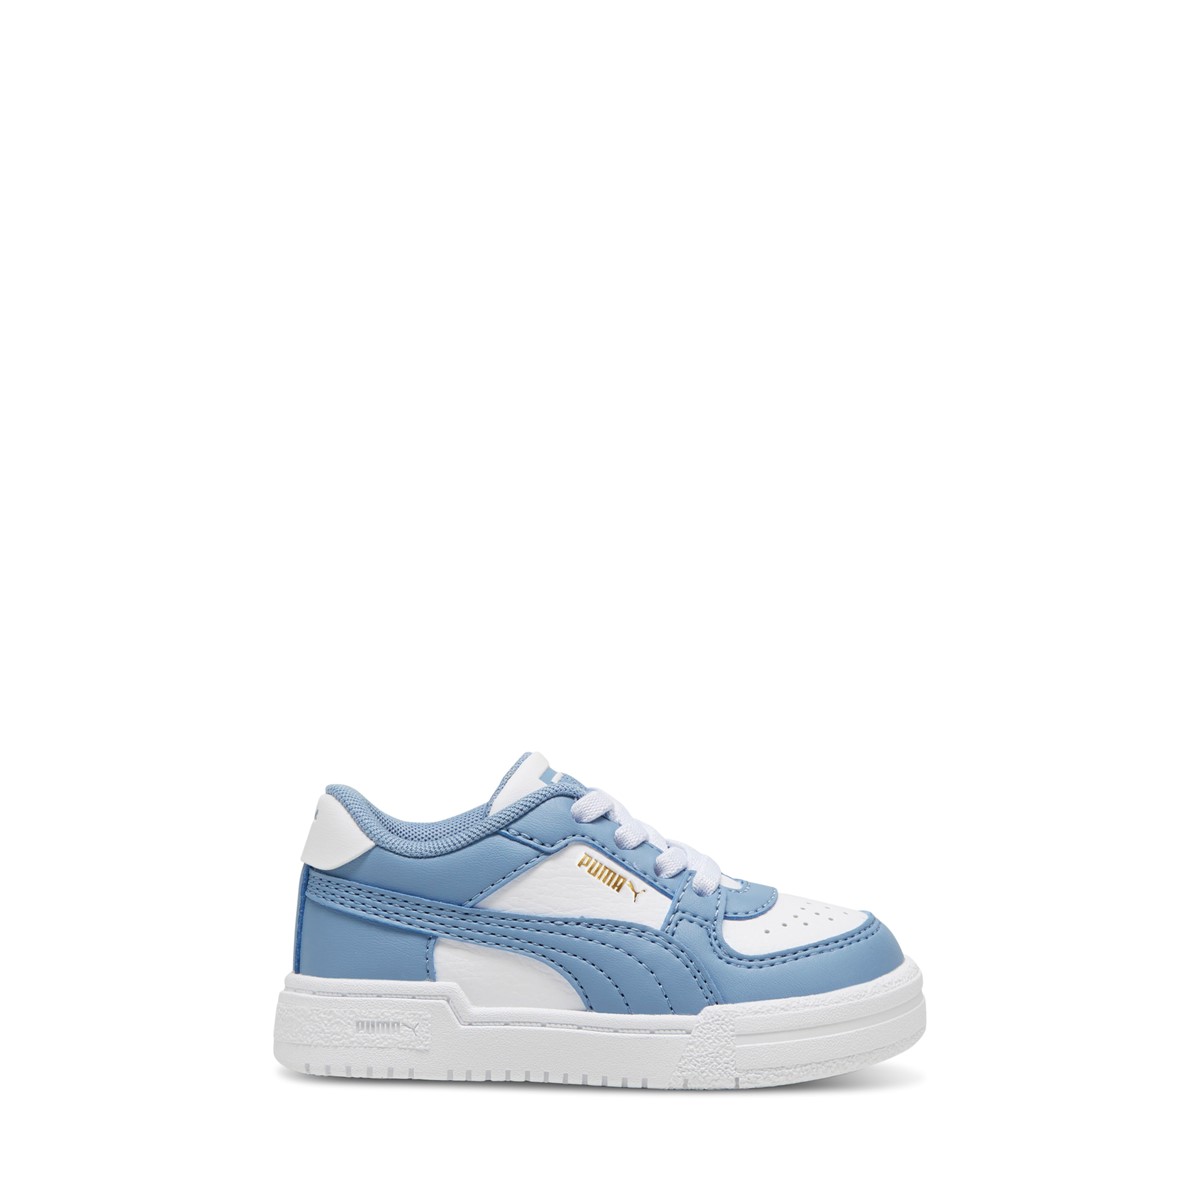 Toddler's CA Pro Sneakers in Blue/White